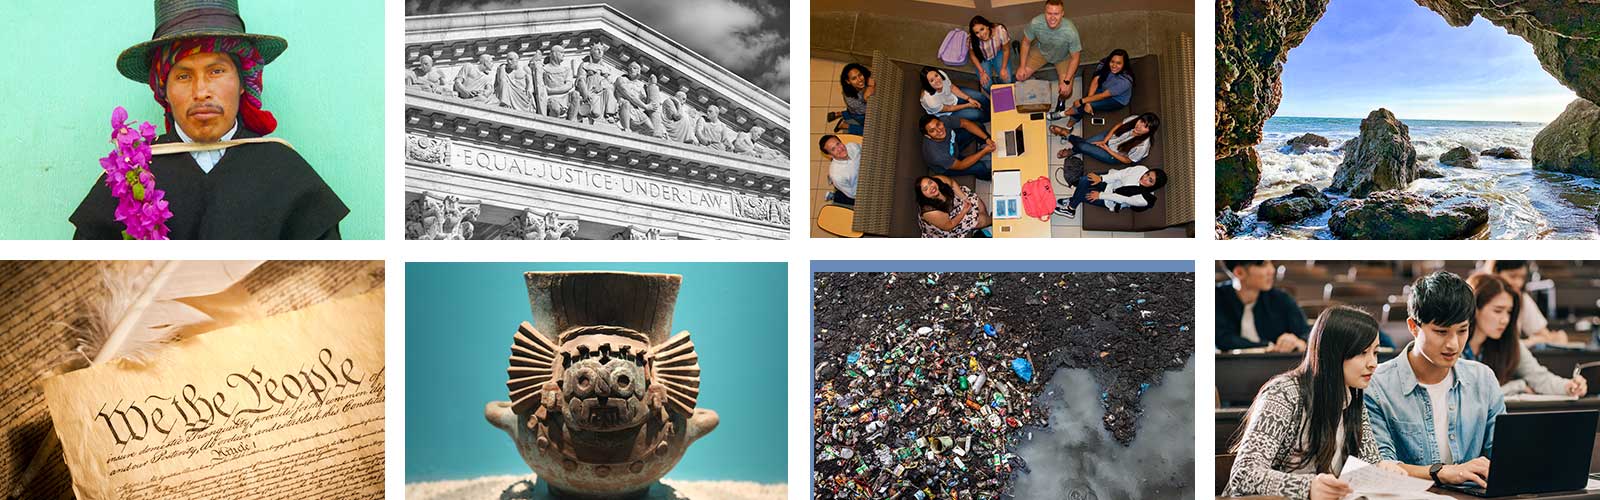 A selection of images of oceans, cities, pollution, and students in the classroom